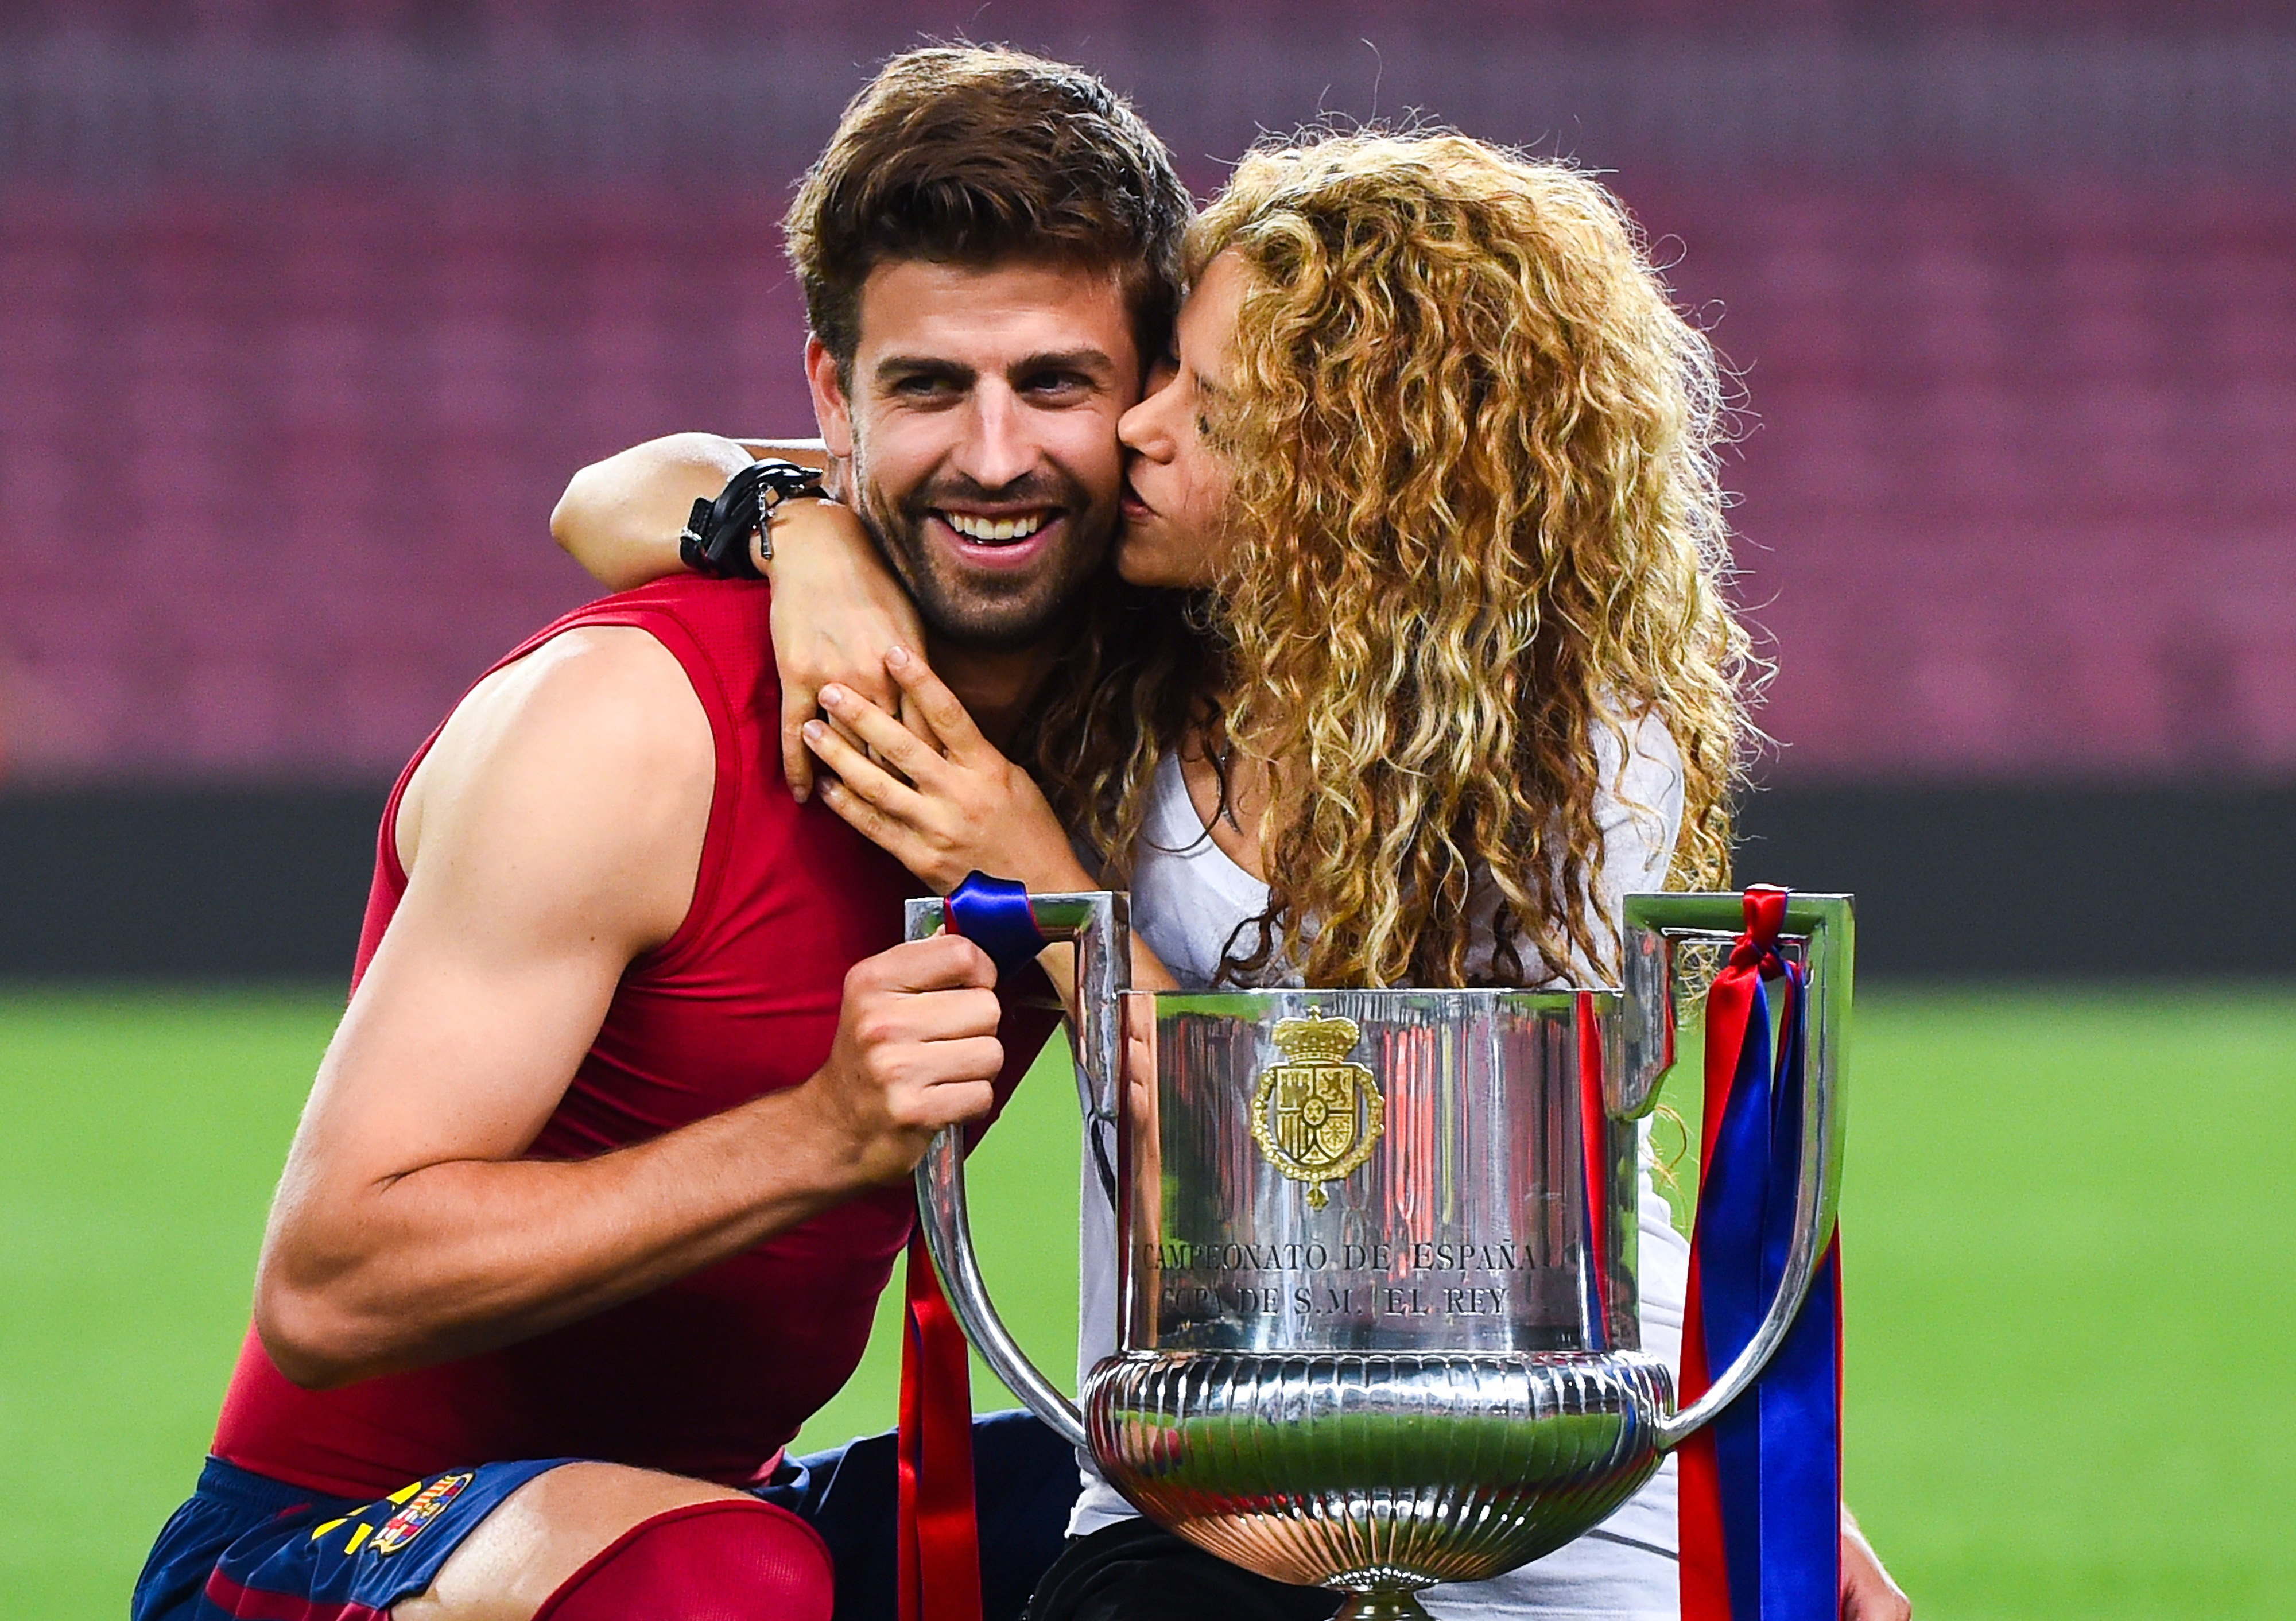 Shakira kisses Gerard Piqué who smiles, holding a trophy on a sports field